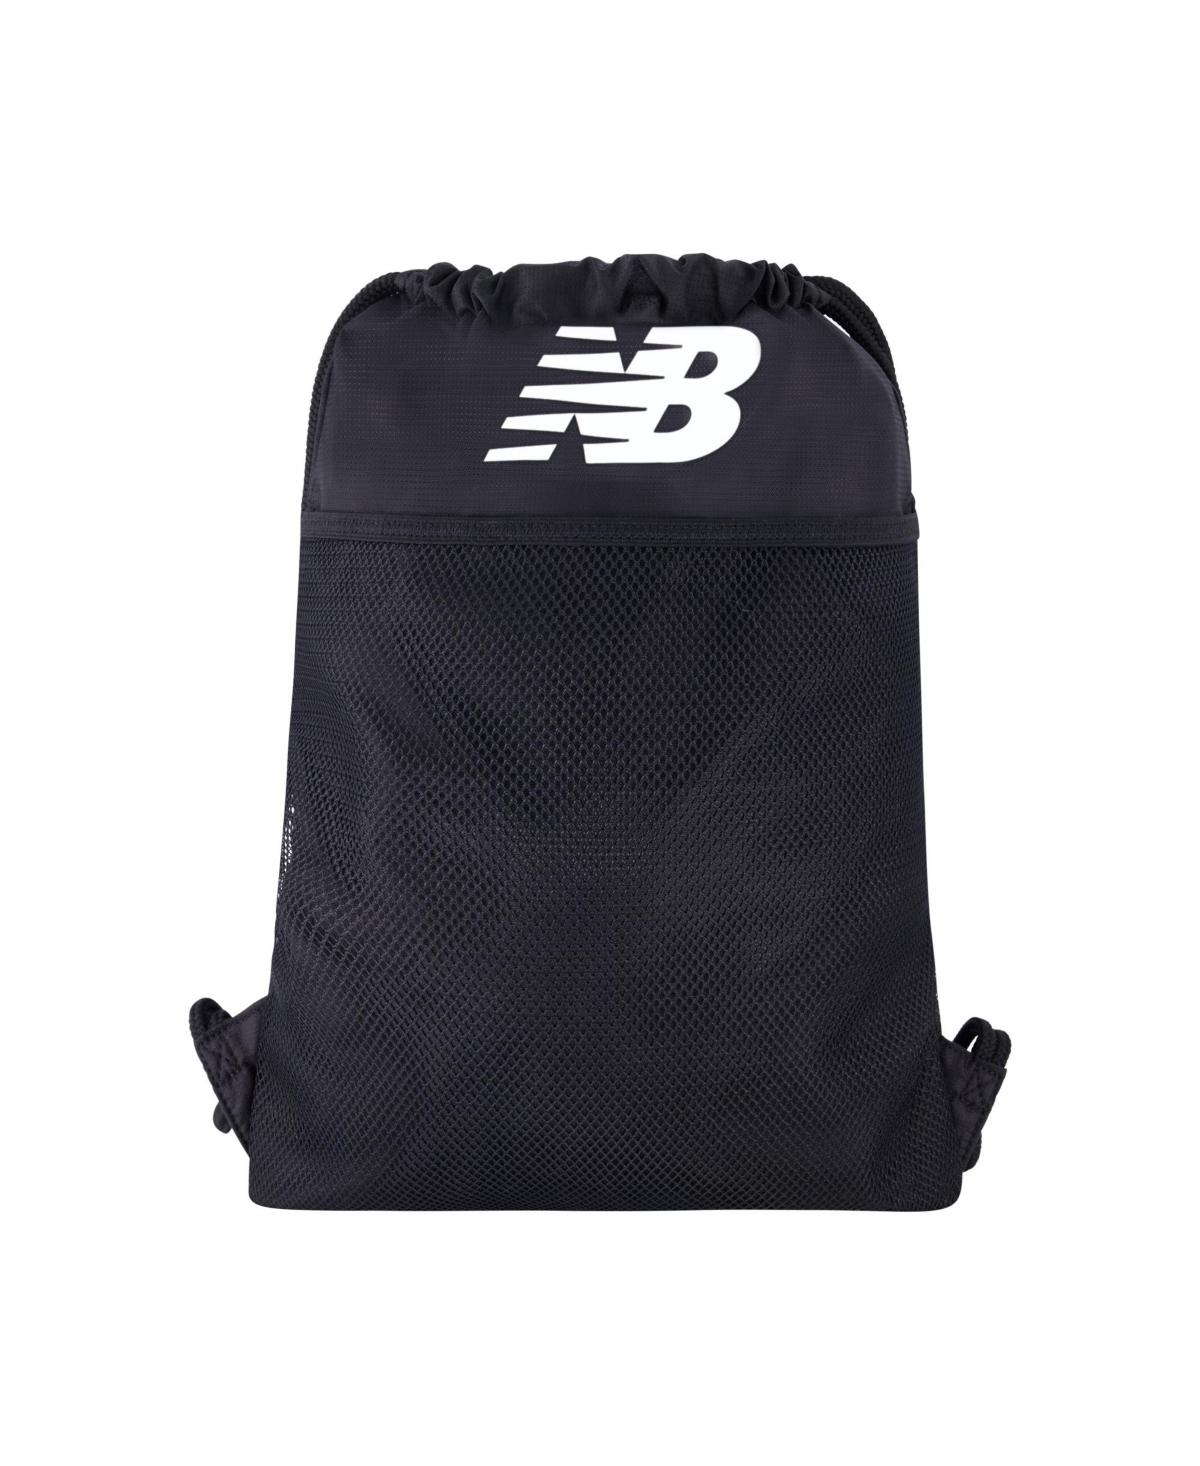 New Balance 17.5" Core Sackpack in Black | Lyst